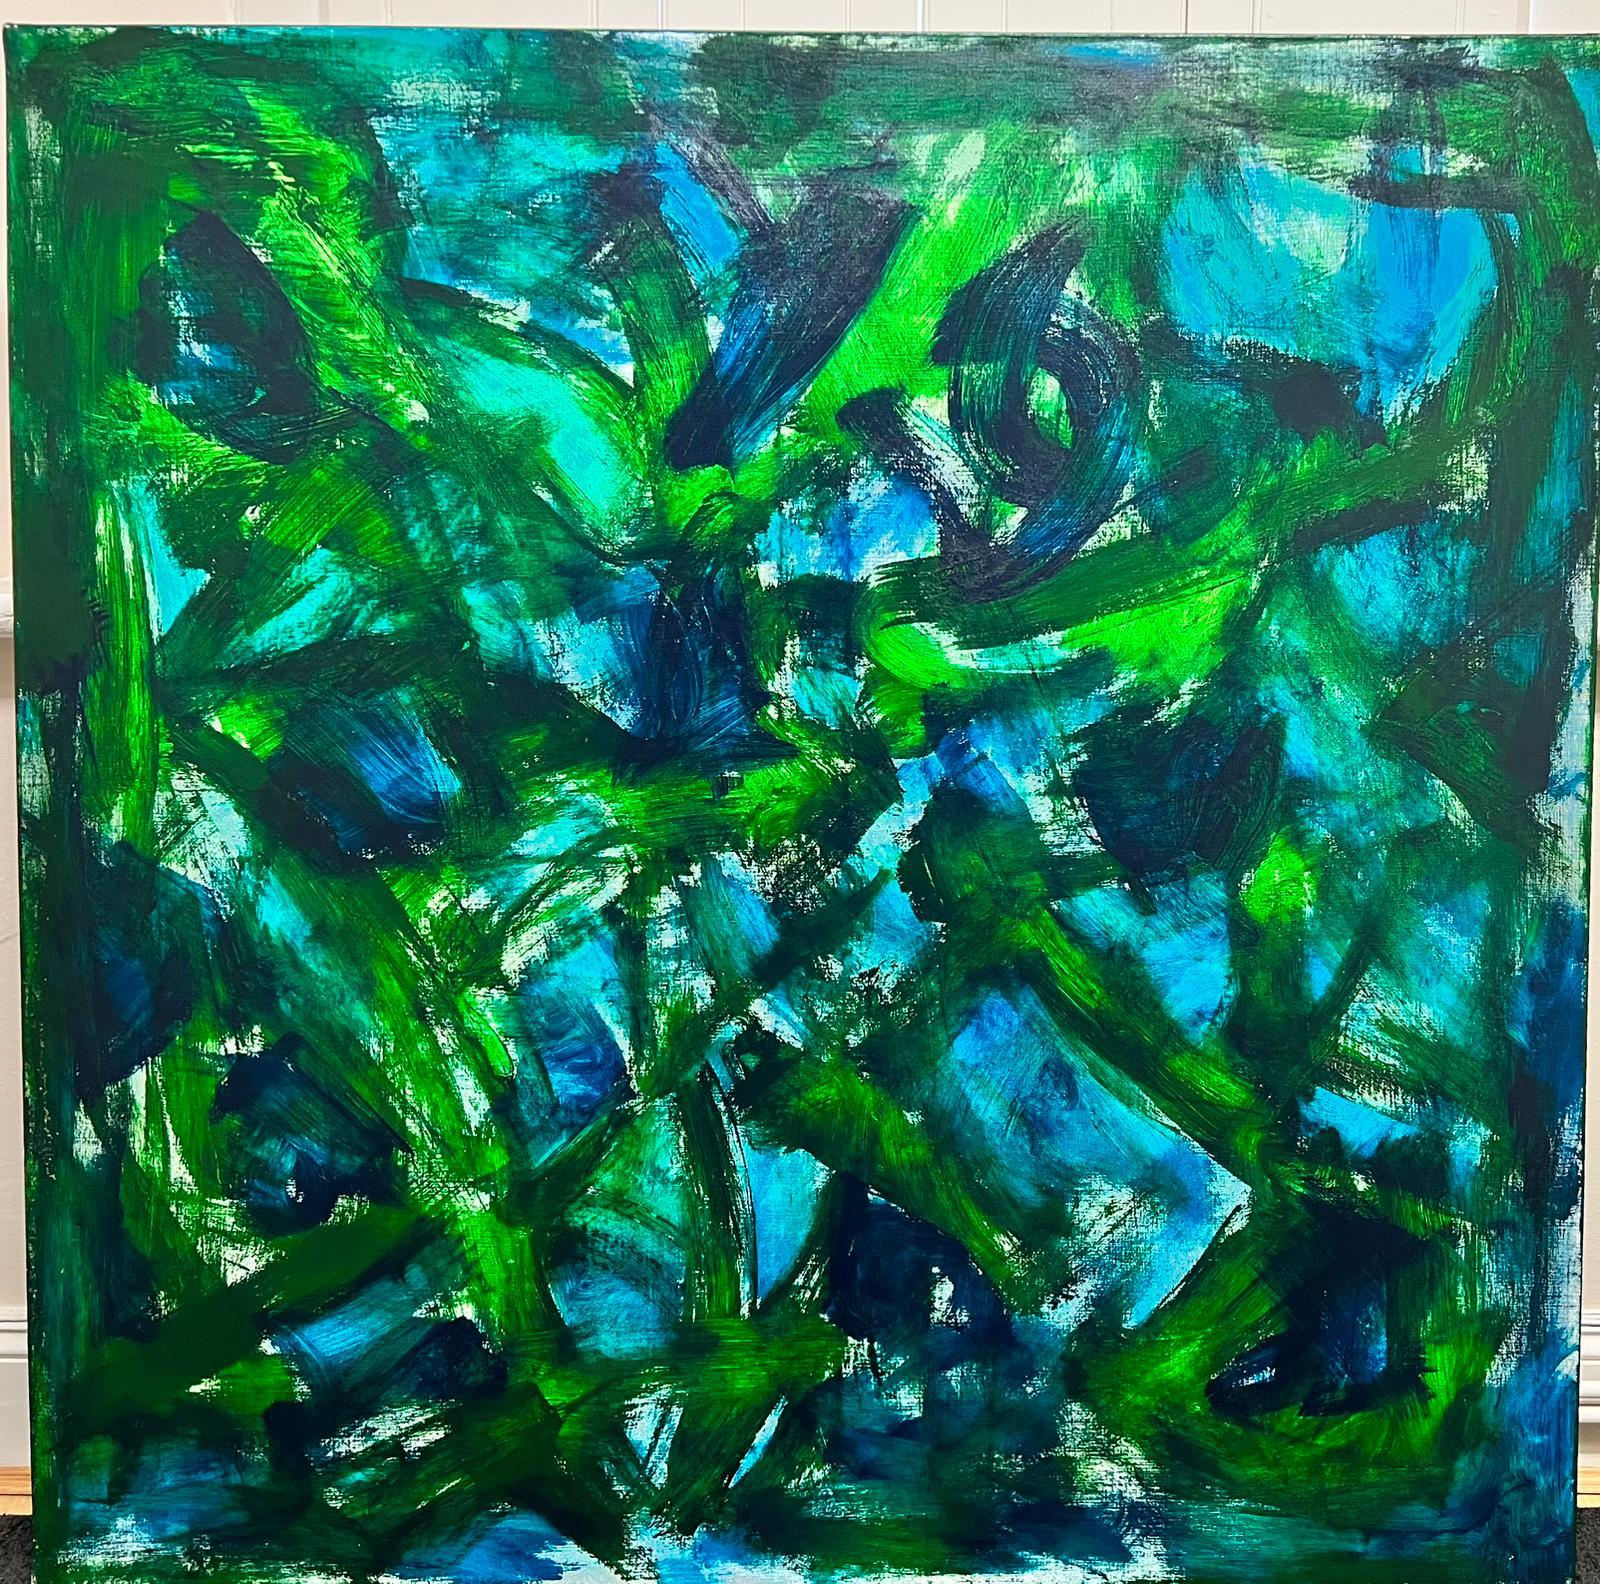 CONTEMPORARY BRITISH ABSTRACT HUGE PAINTING - Green and Blues - Painting by Sally Bradshaw